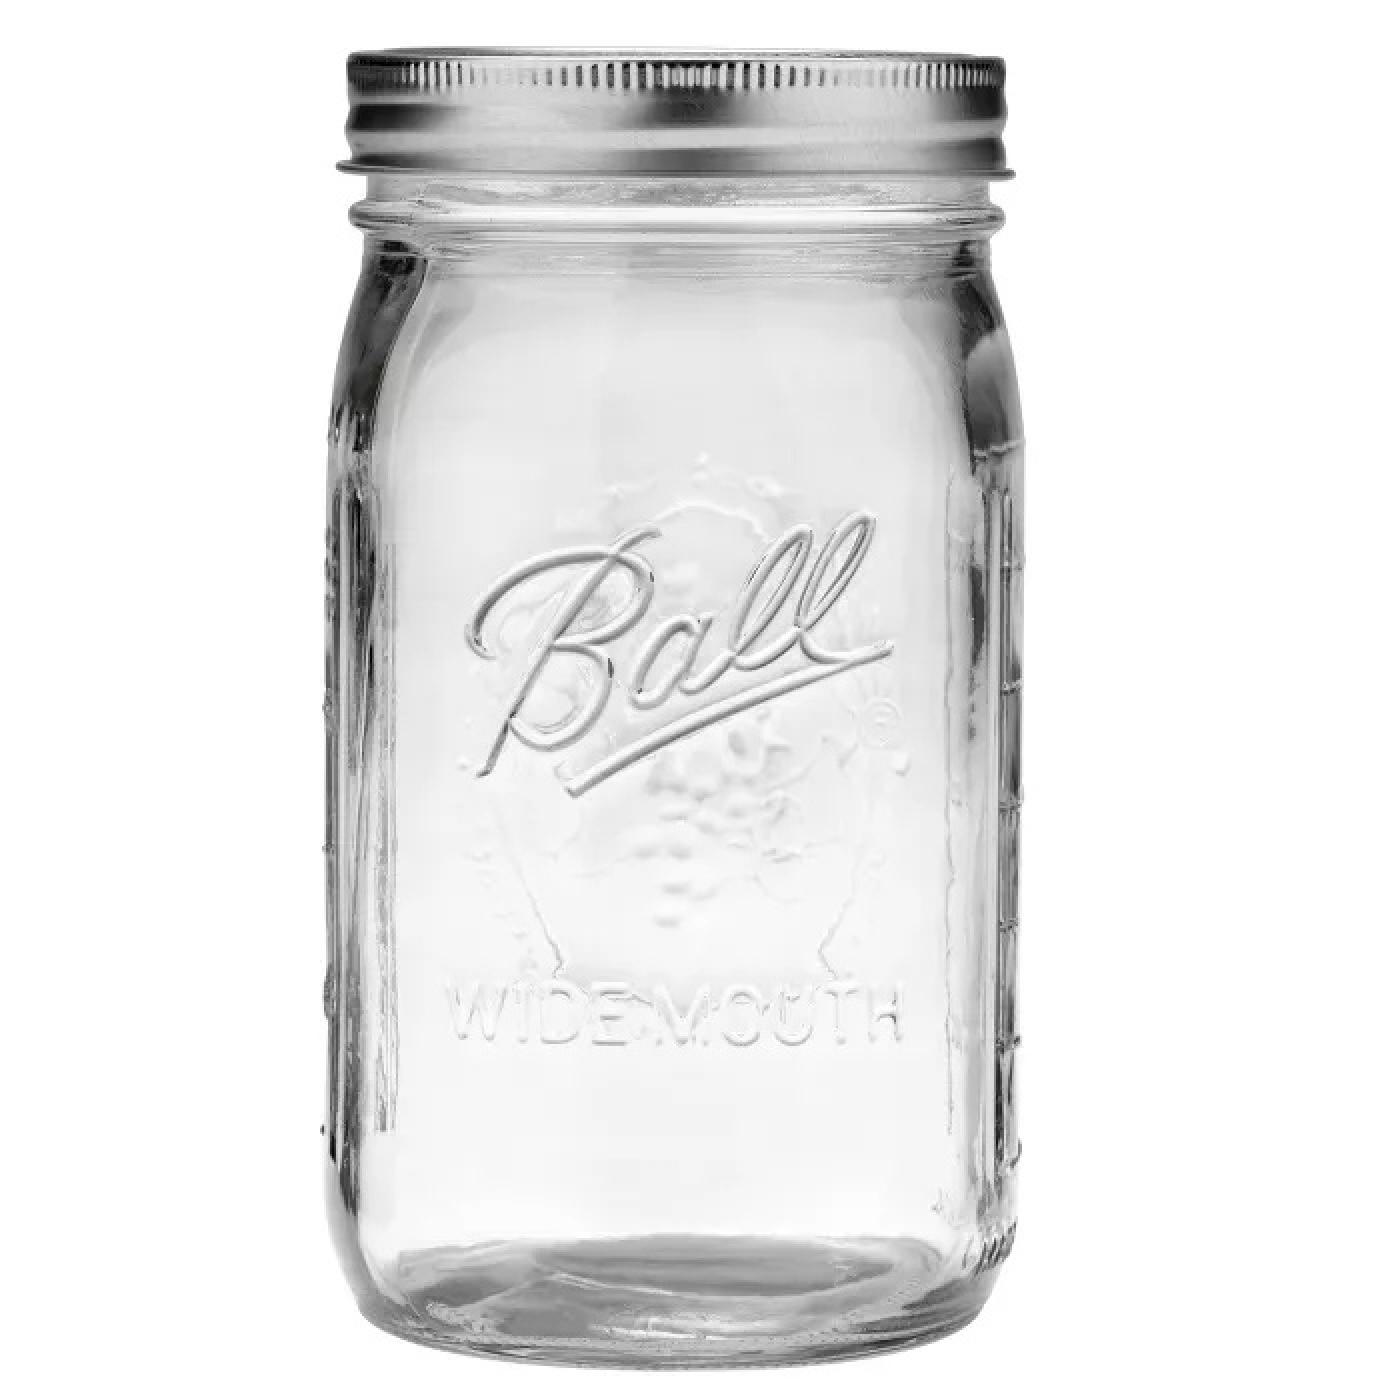 Ball 32 oz Wide Mouth Canning Jar